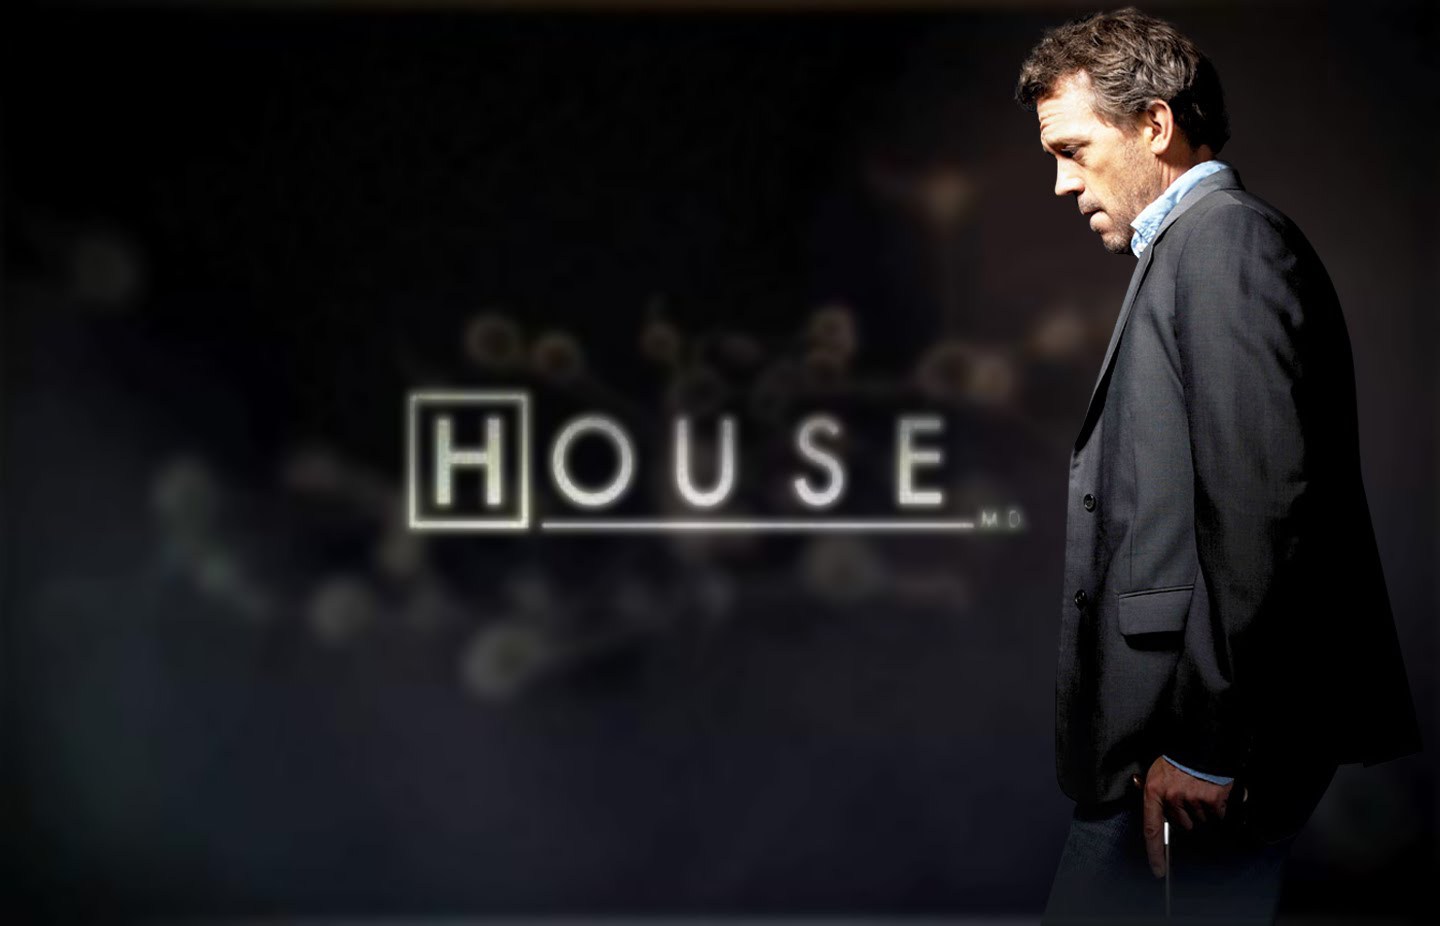 Dr House Wallpaper - House Md , HD Wallpaper & Backgrounds